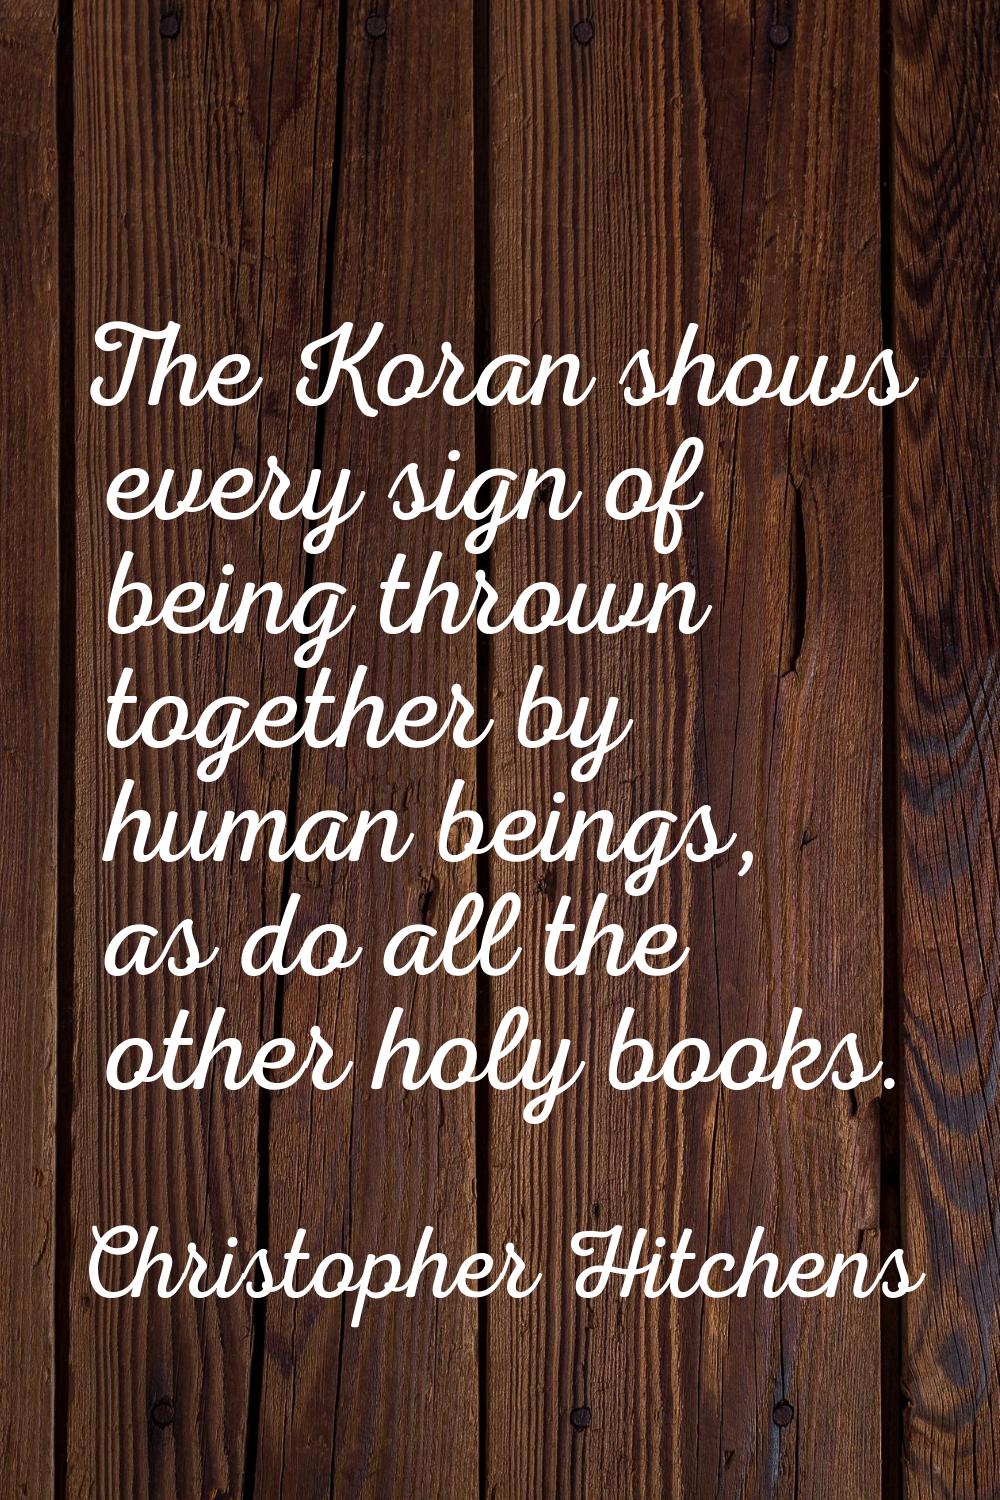 The Koran shows every sign of being thrown together by human beings, as do all the other holy books